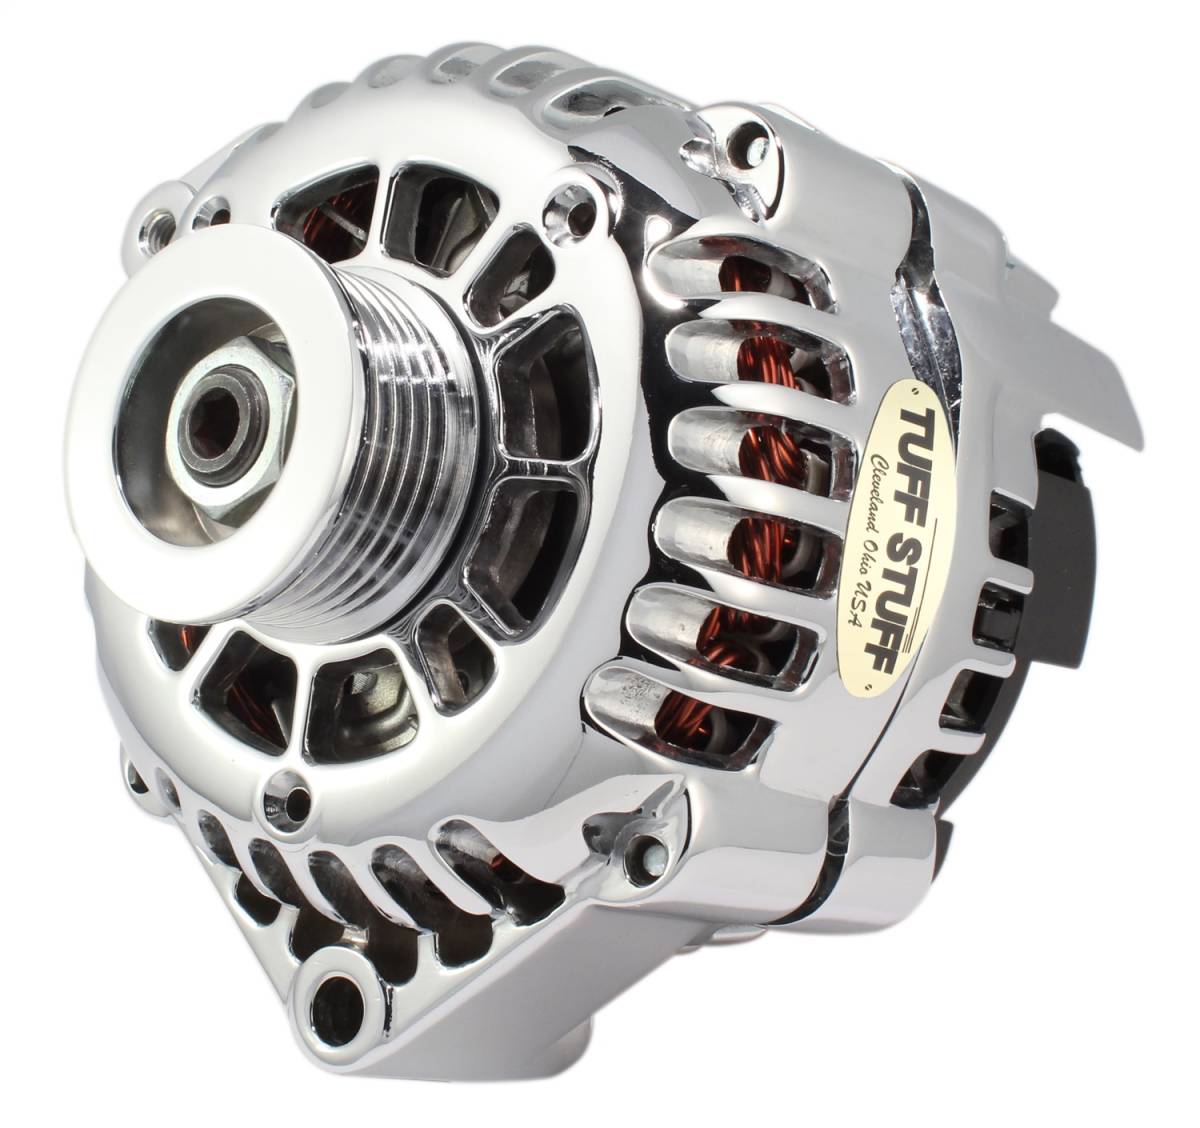 Tuff Stuff Performance - Alternator 175 AMP Upgrade Chrome Plated 1-Wire Hookup Back Post 6 Groove Pulley 8233NC1